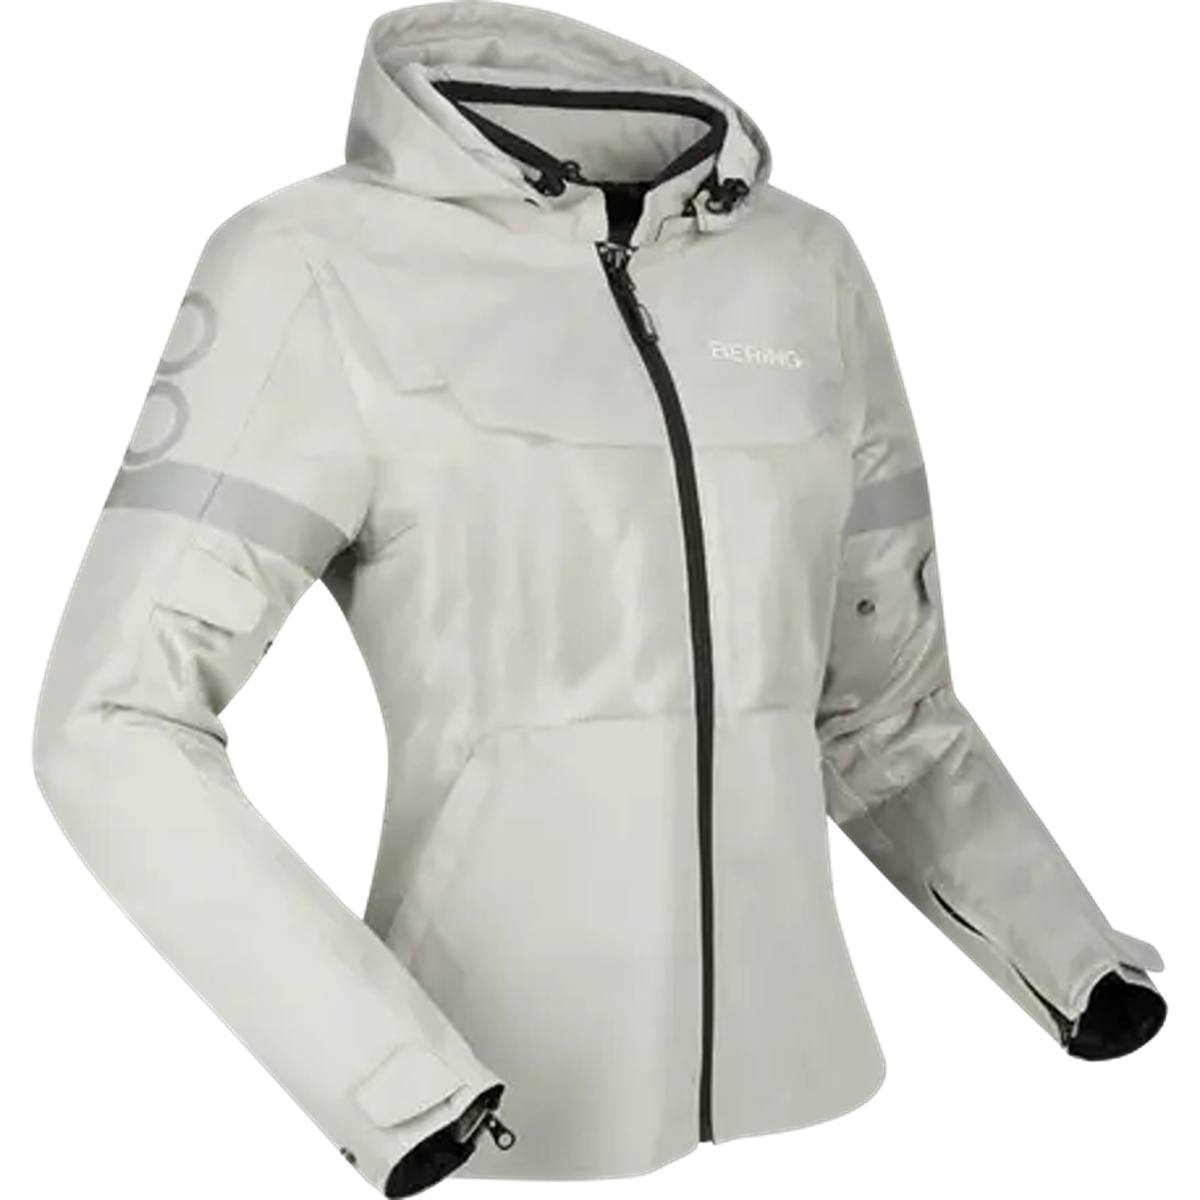 Image of Bering Lady Profil Jacket Grey Black Taille T0